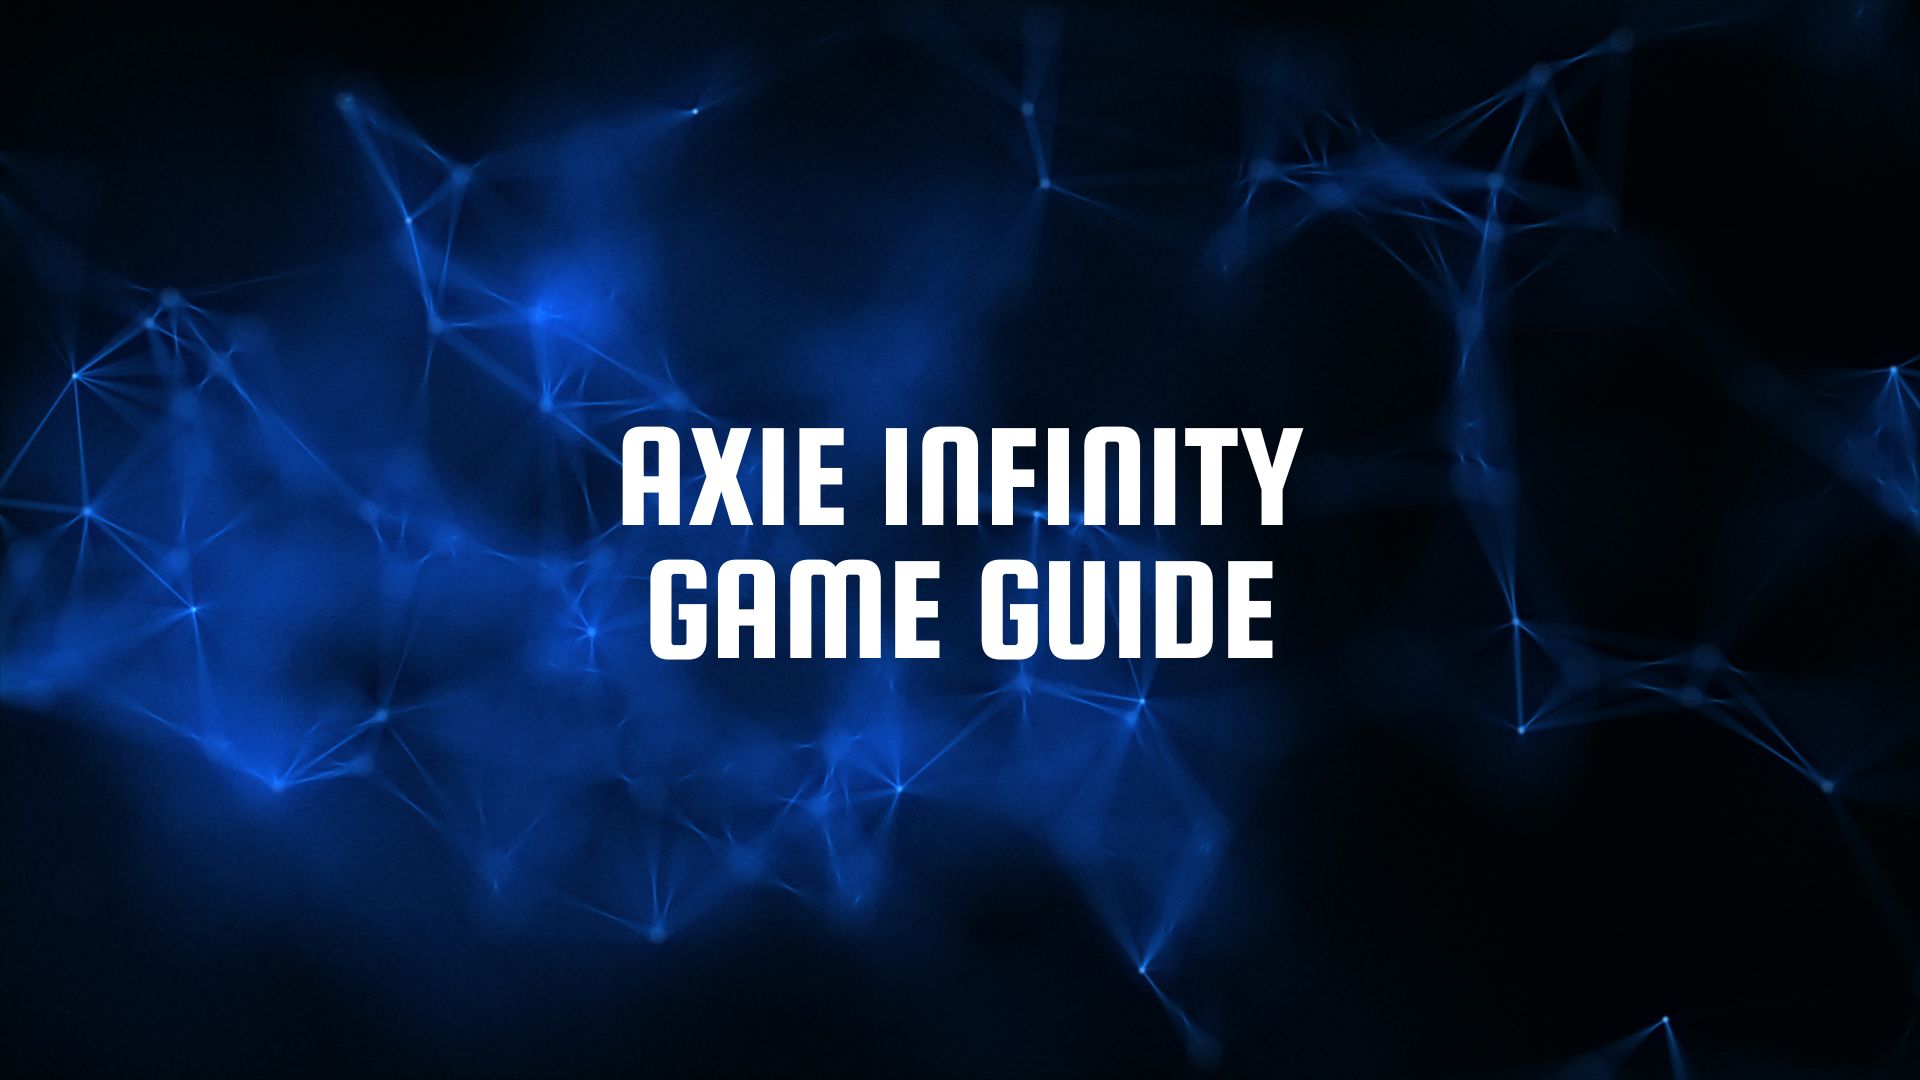 Axie Infinity Game Guide for Beginners